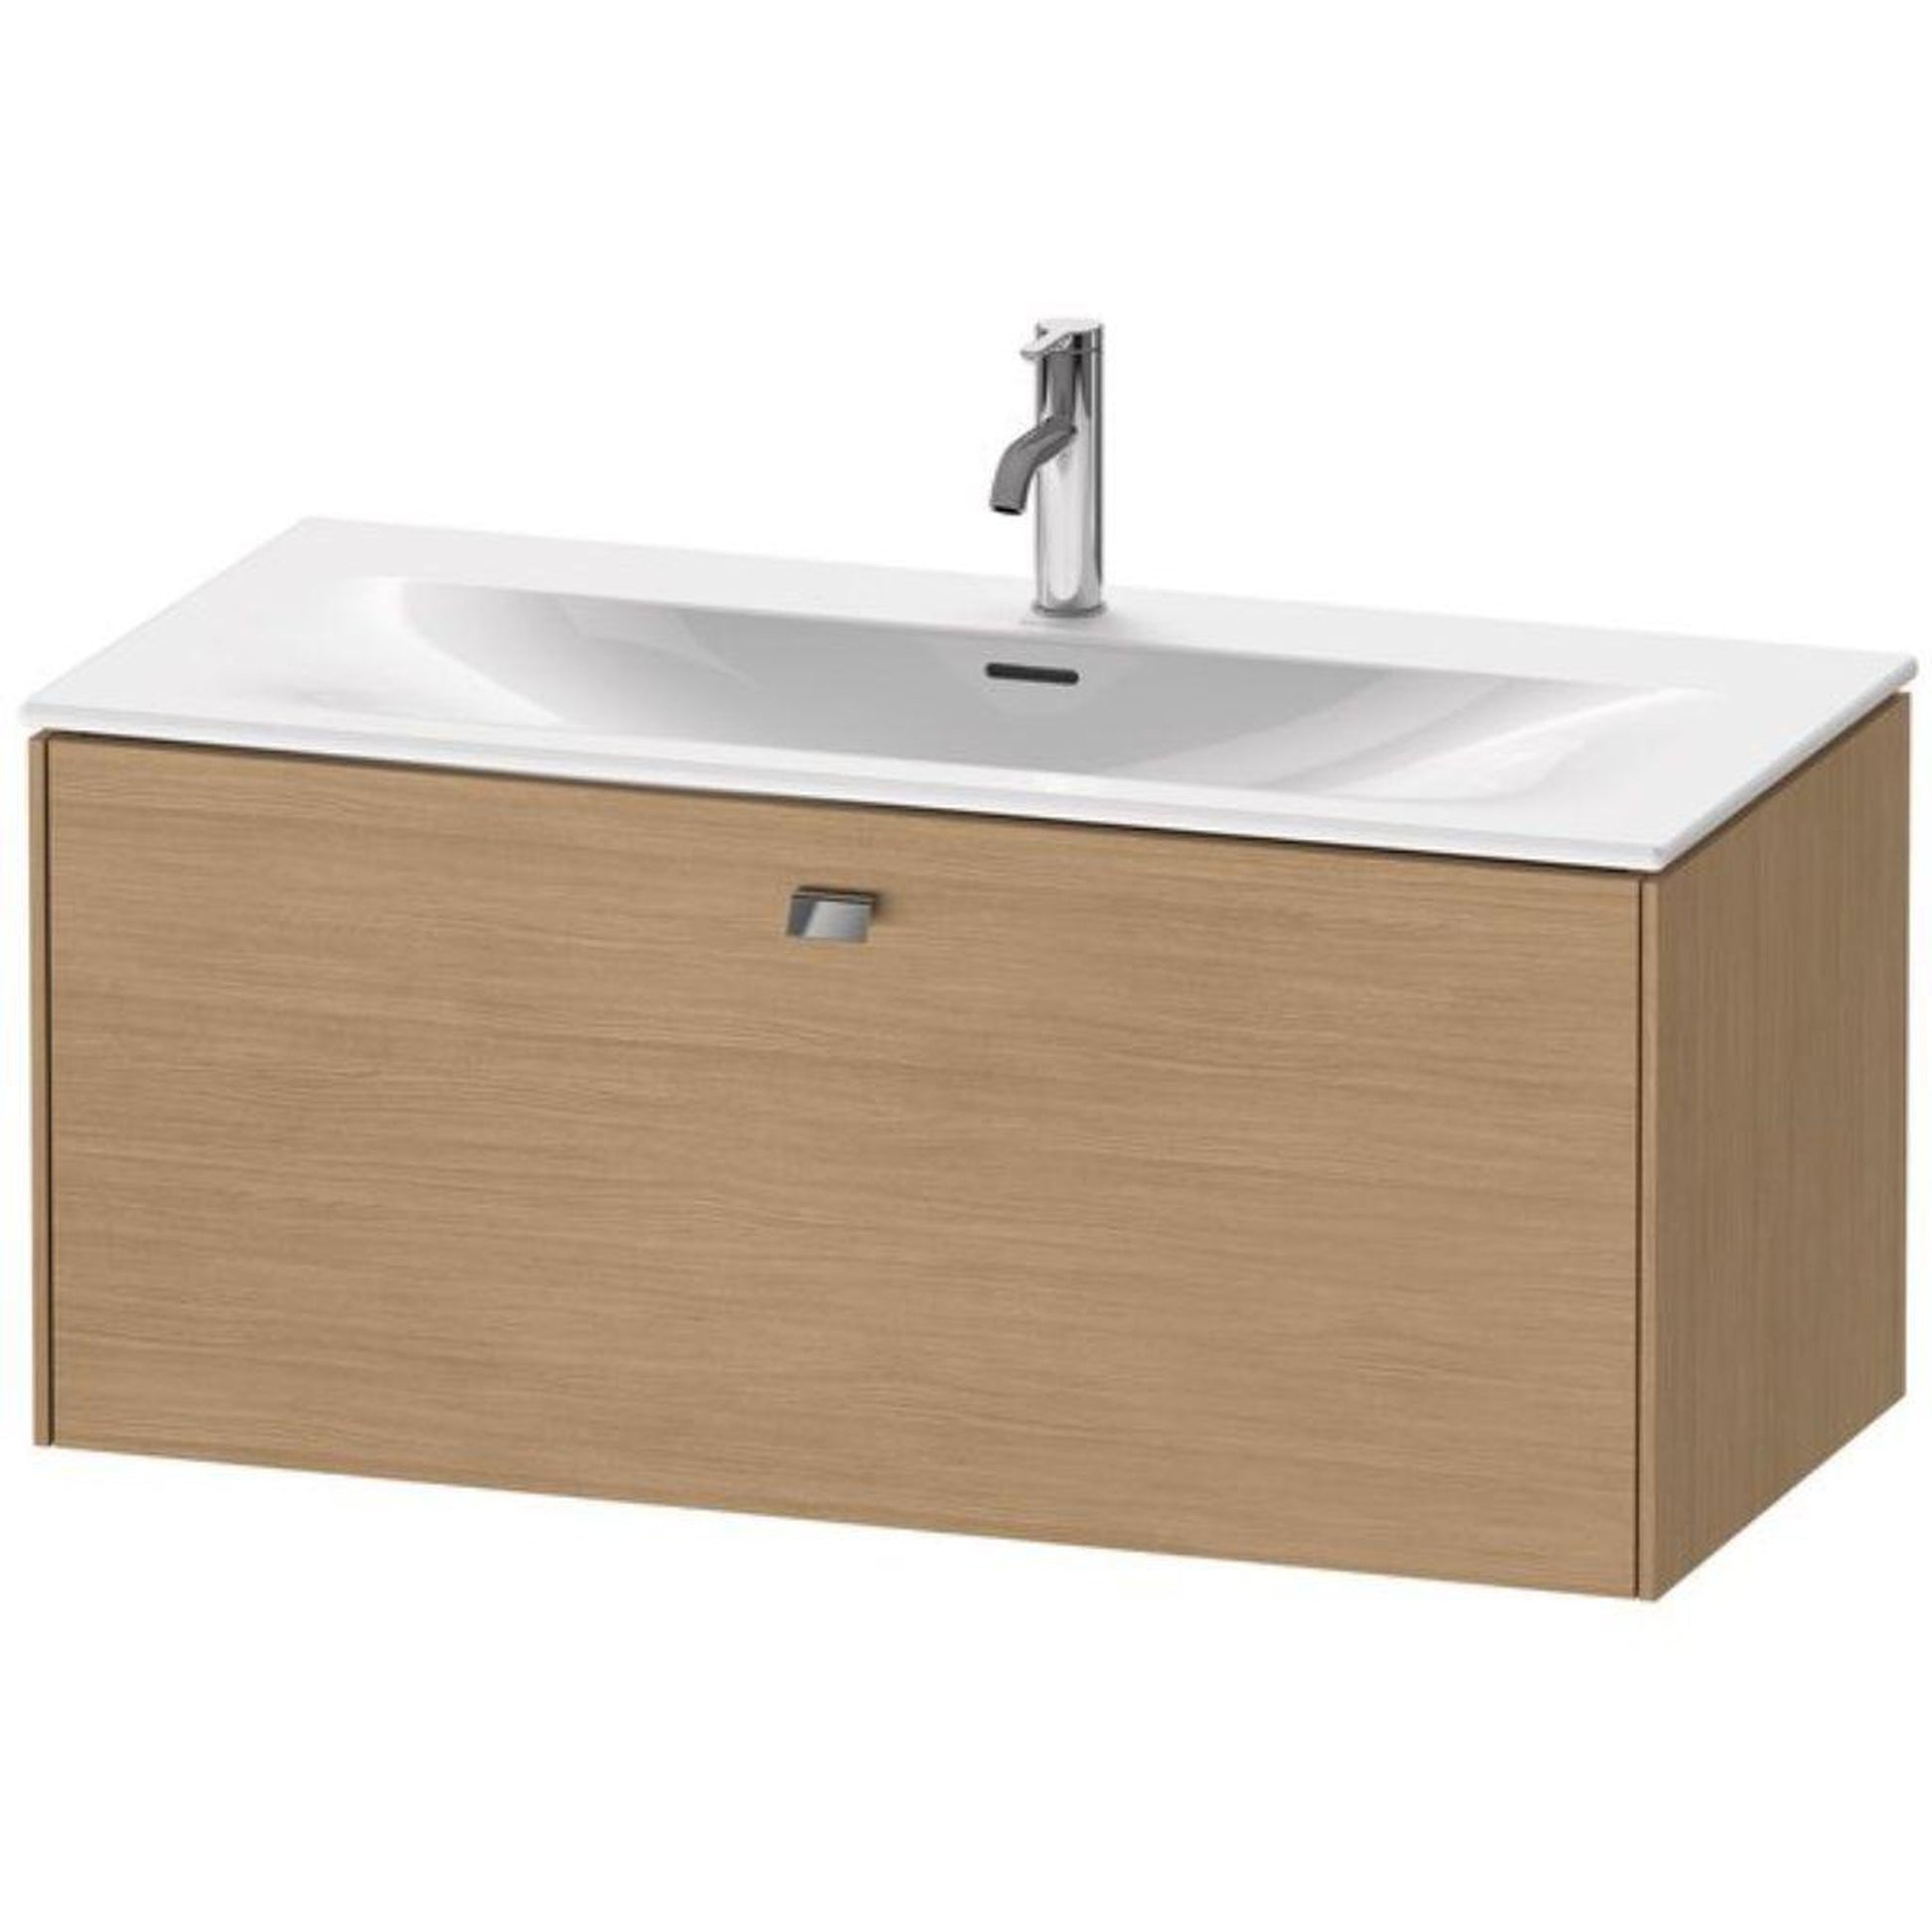 Duravit Brioso BR42130 40" x 17" x 19" One Drawer Wall-Mount Vanity Unit in European Oak and Chrome Handle